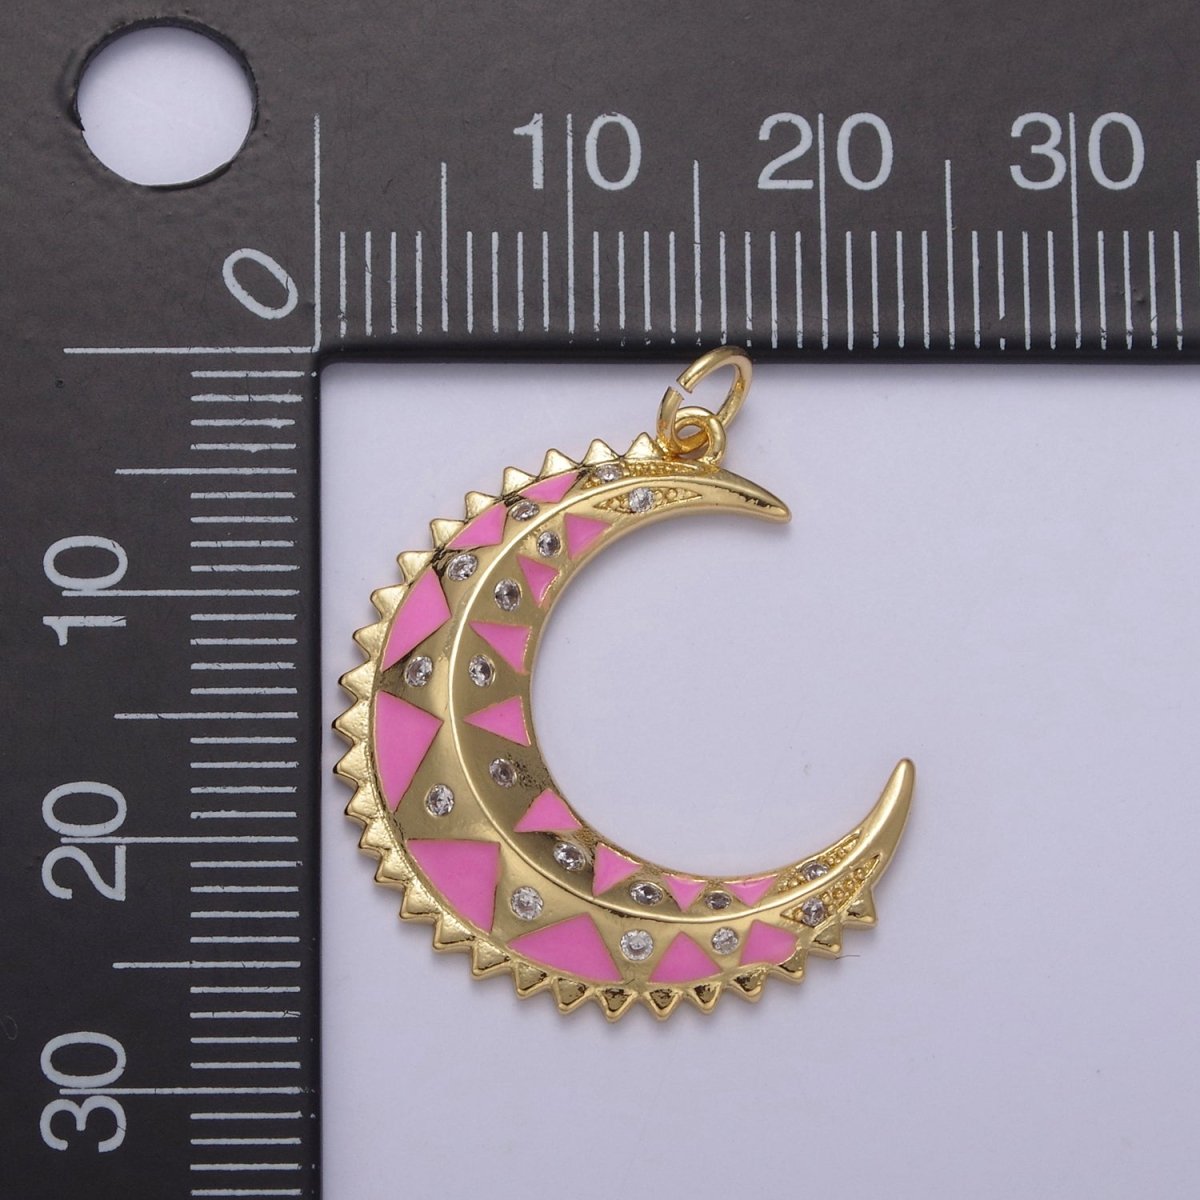 Dainty Enamel Crescent Moon Charm, Celestial Jewelry Gold Moon Pendant, 14K Gold Filled Moon Charm Pendant for Necklace Bracelet Charm Supply N-736 - N-743 - DLUXCA